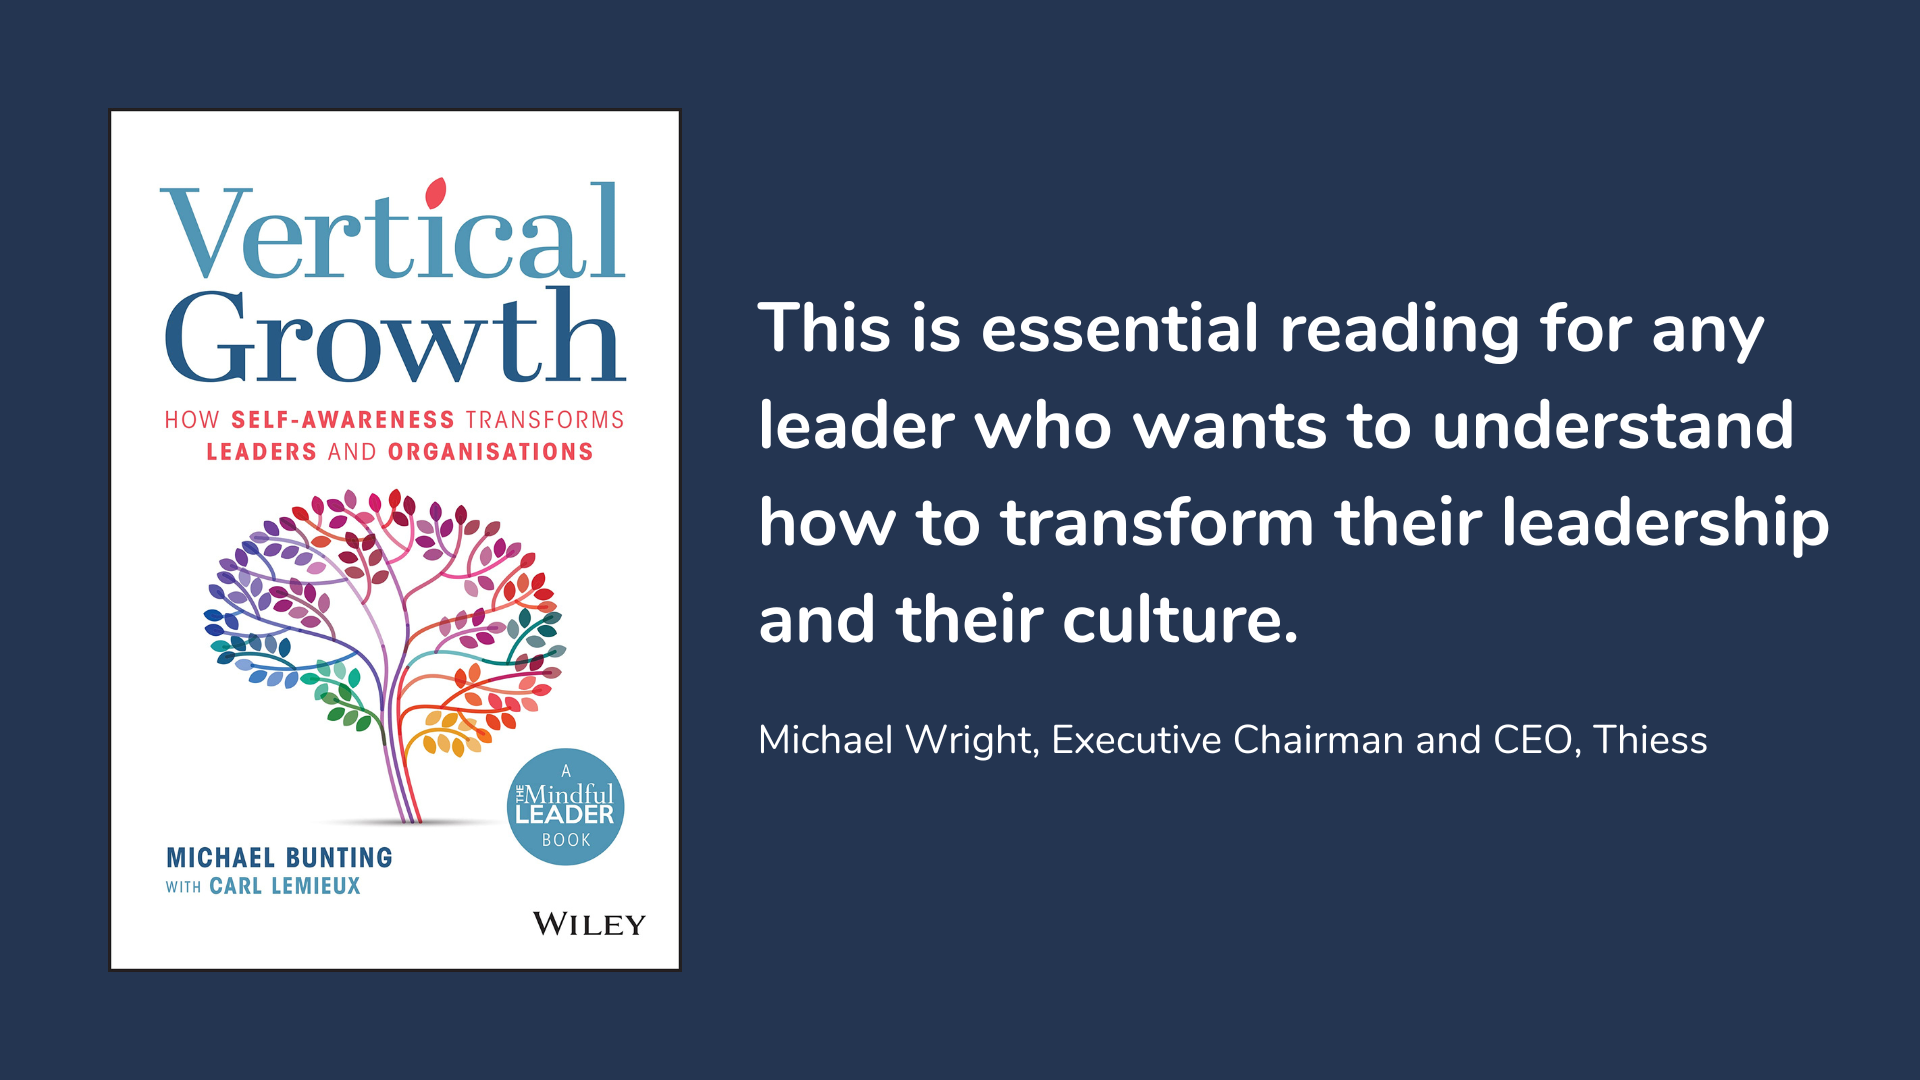 Vertical Growth: How Self-Awareness Transforms Leaders and Organisations, book cover and description.